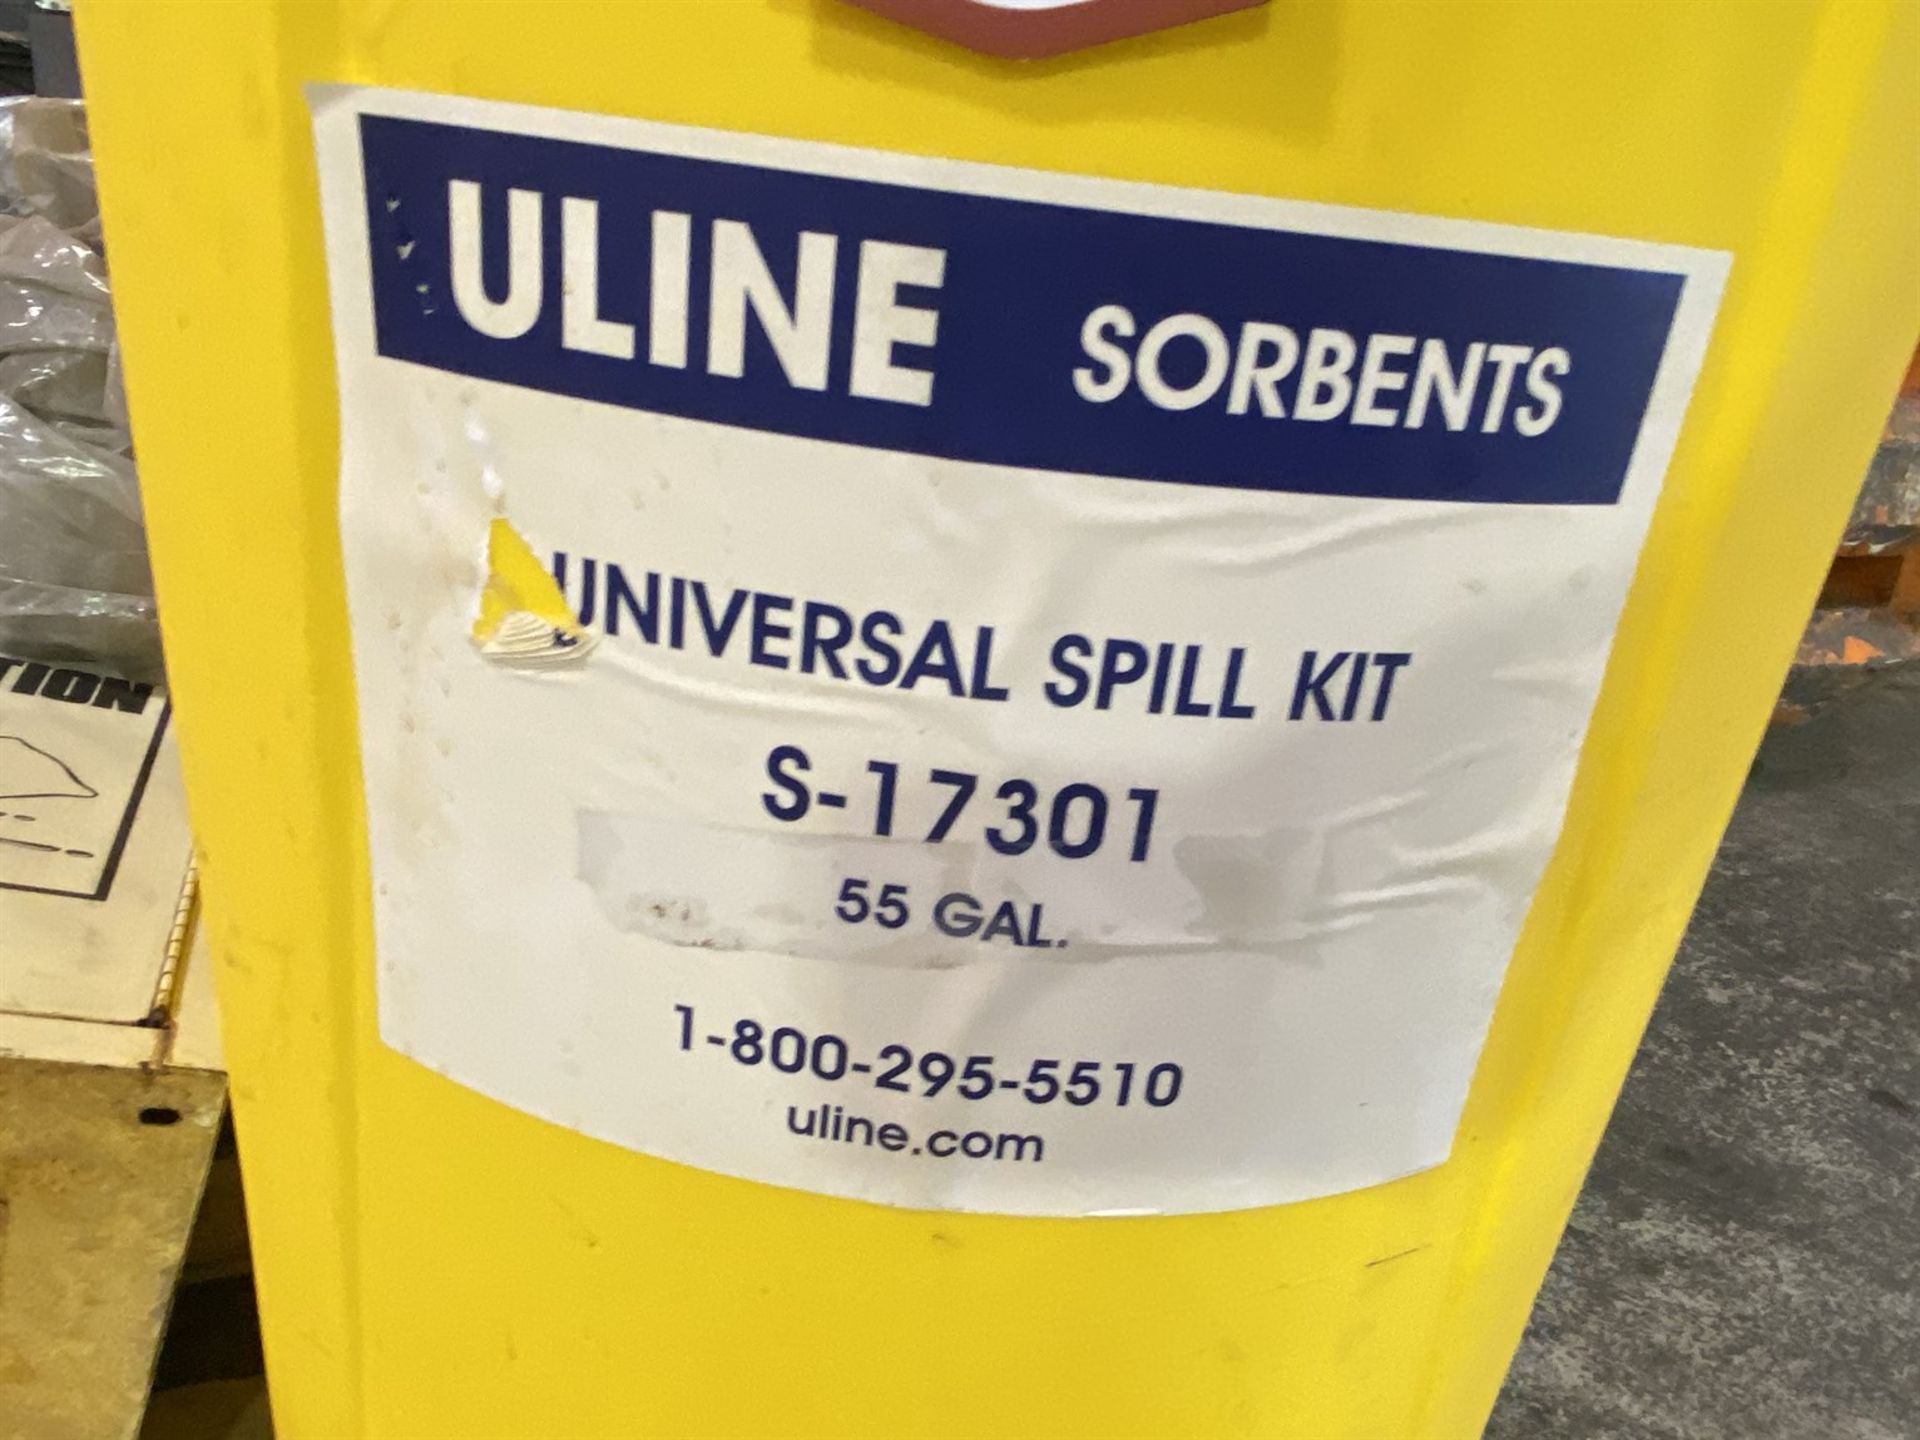 Lot of (2) ULINE A-17301 55 GAL Universal Spill Kits - Image 2 of 2